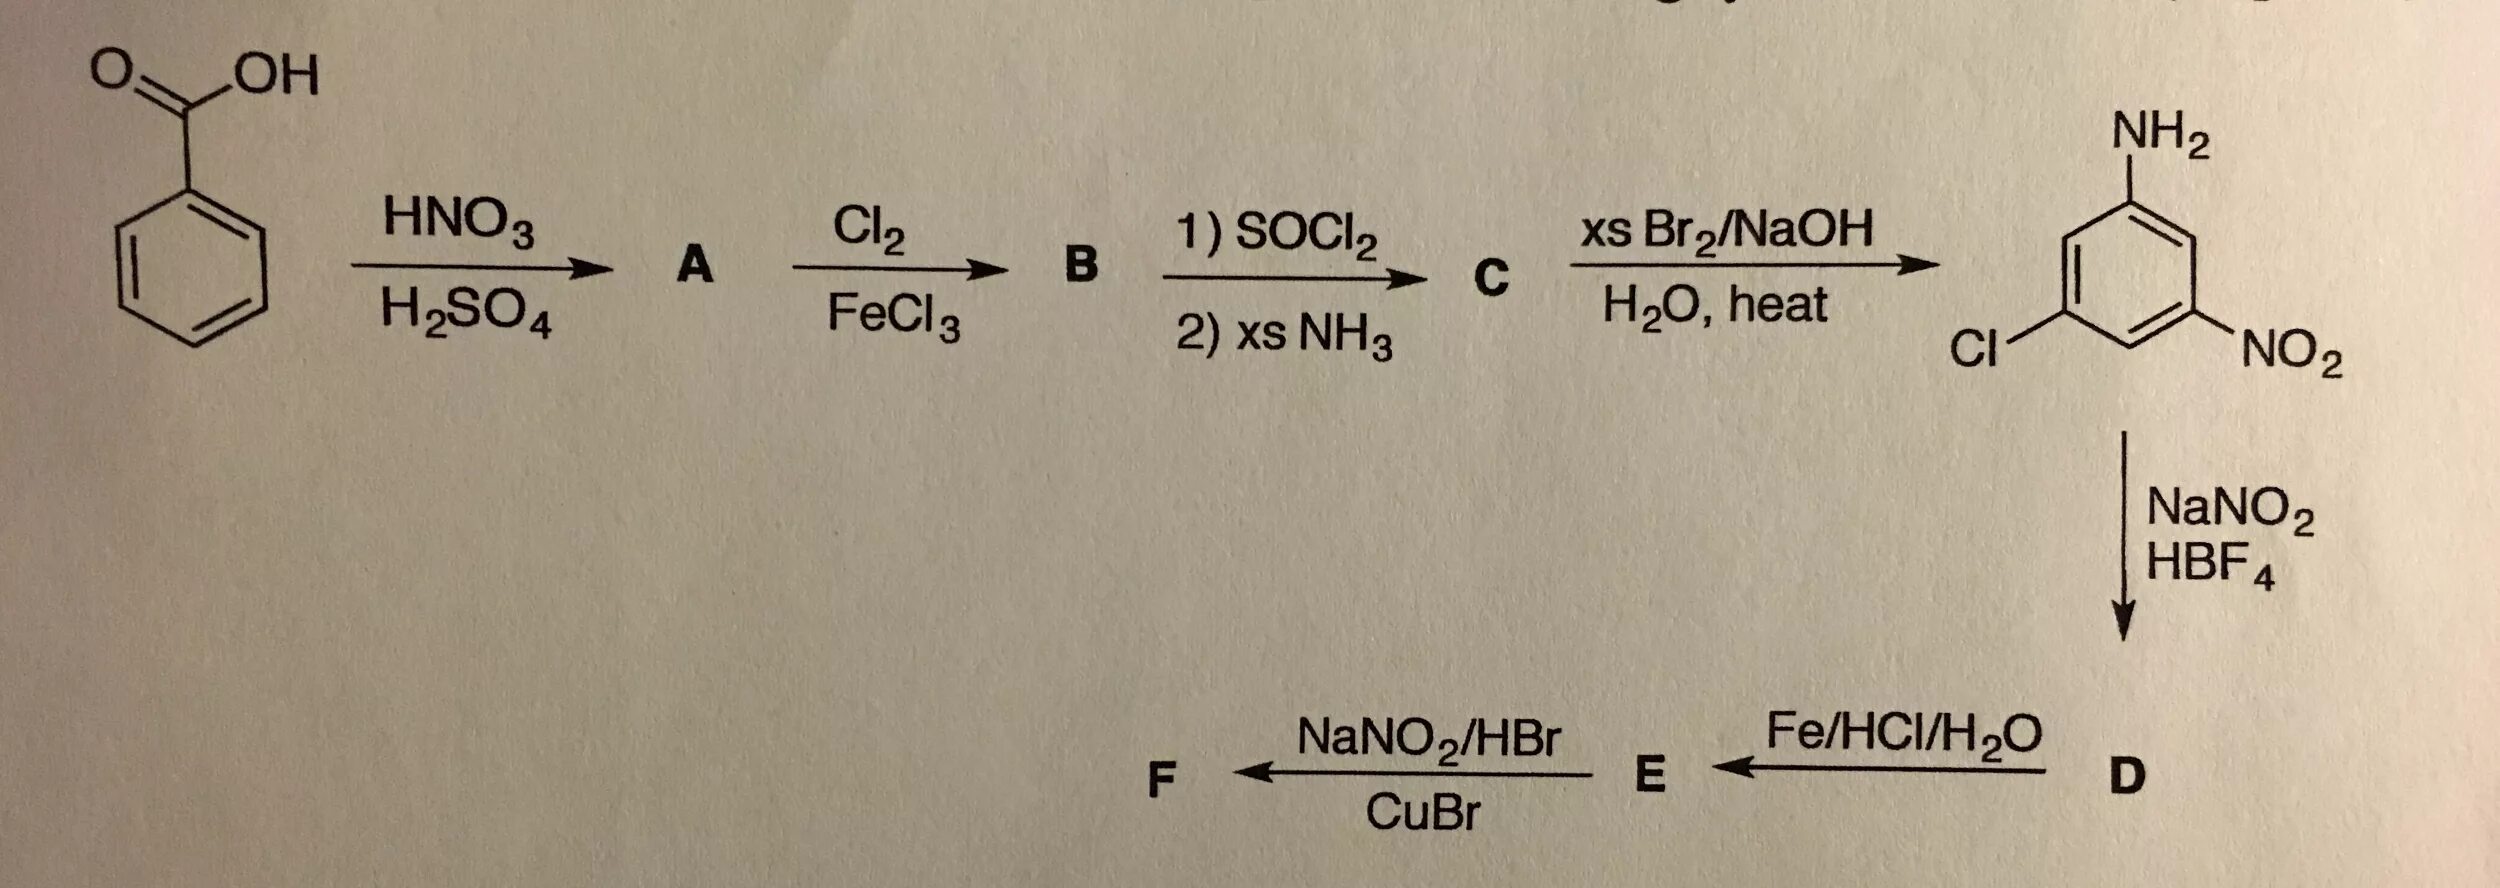 Ch3nh3br + hno2. Бензол hno2. Бензол hno3 h2so4. Метилбензол + 2cl2 al2o3.